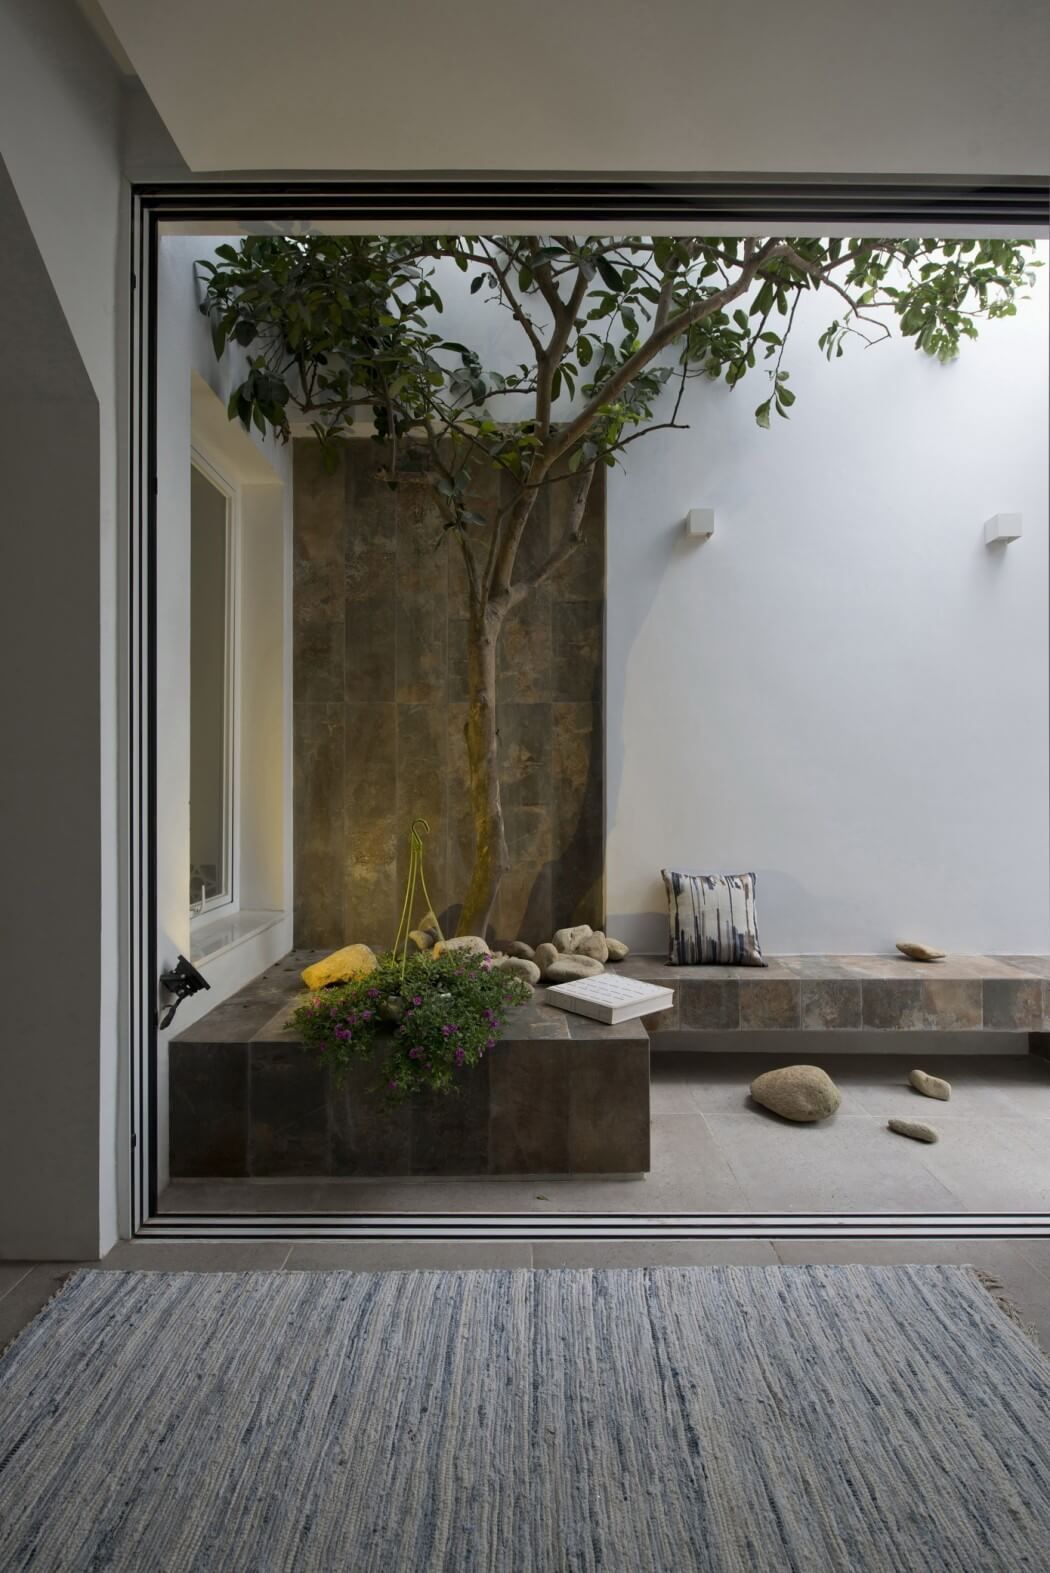 Would make a nice outdoor “sitting area” for the outdoor shower area, to towel off, relax, sip coffee, and all that……..